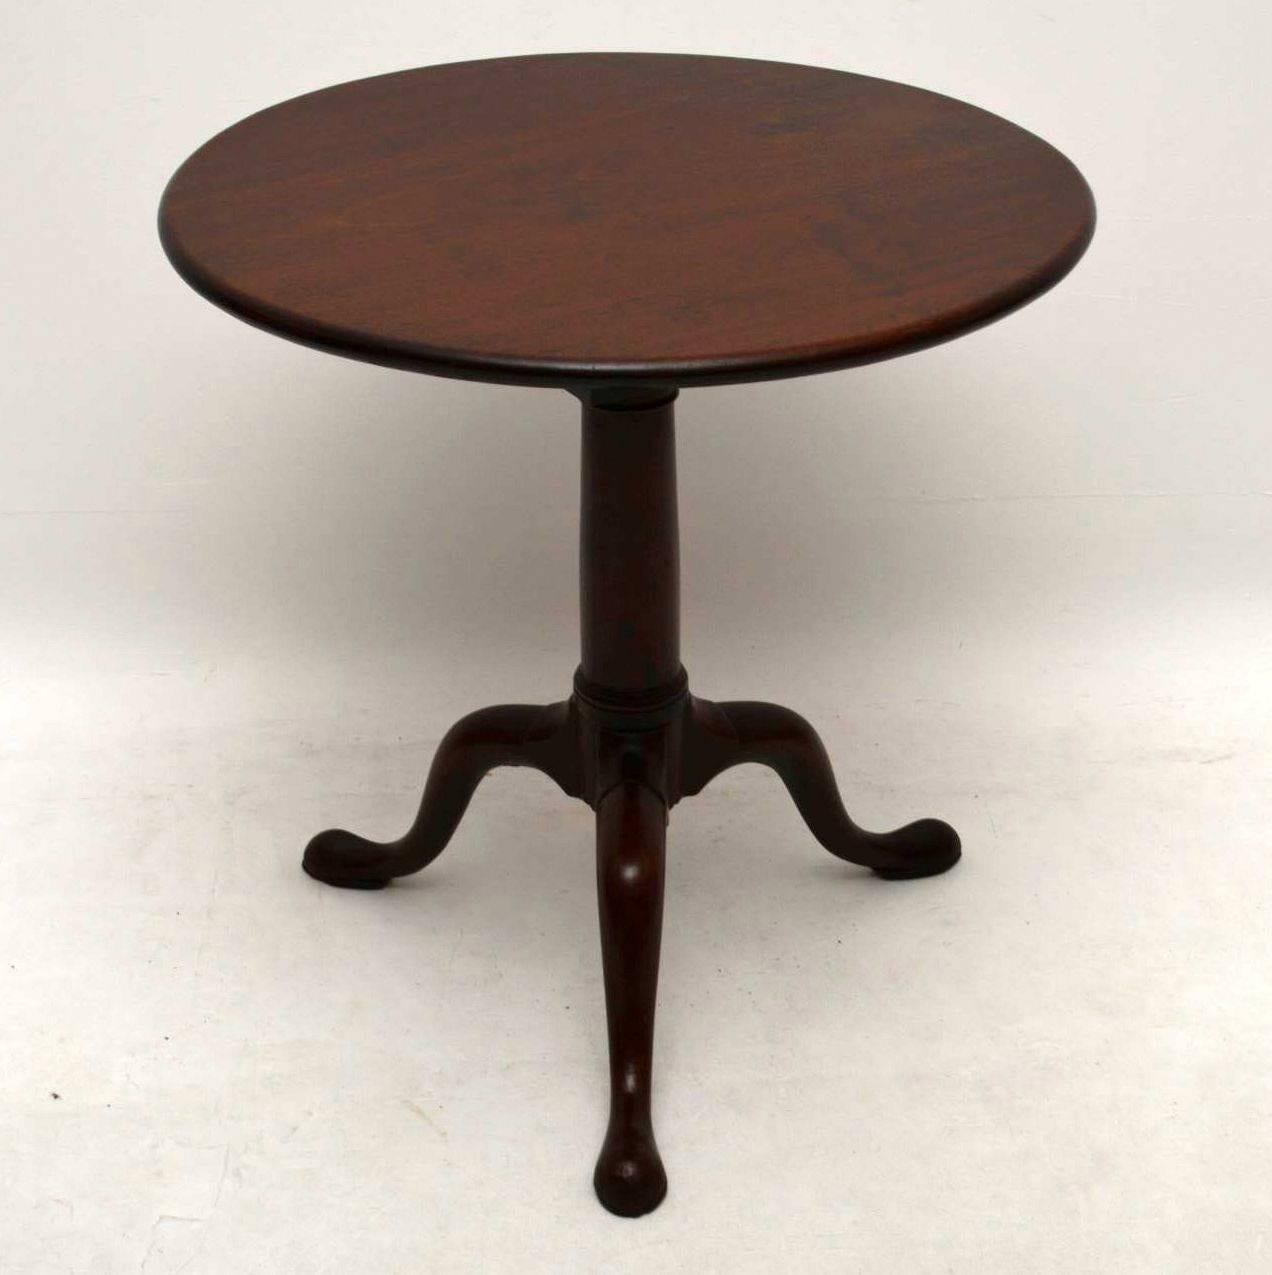 This is an antique period solid mahogany table in good condition, having just been polished and dates to circa 1760-1780 period. It has a round one piece top which tilts and spins around on a birdcage mechanism. During the 18th century the tripod